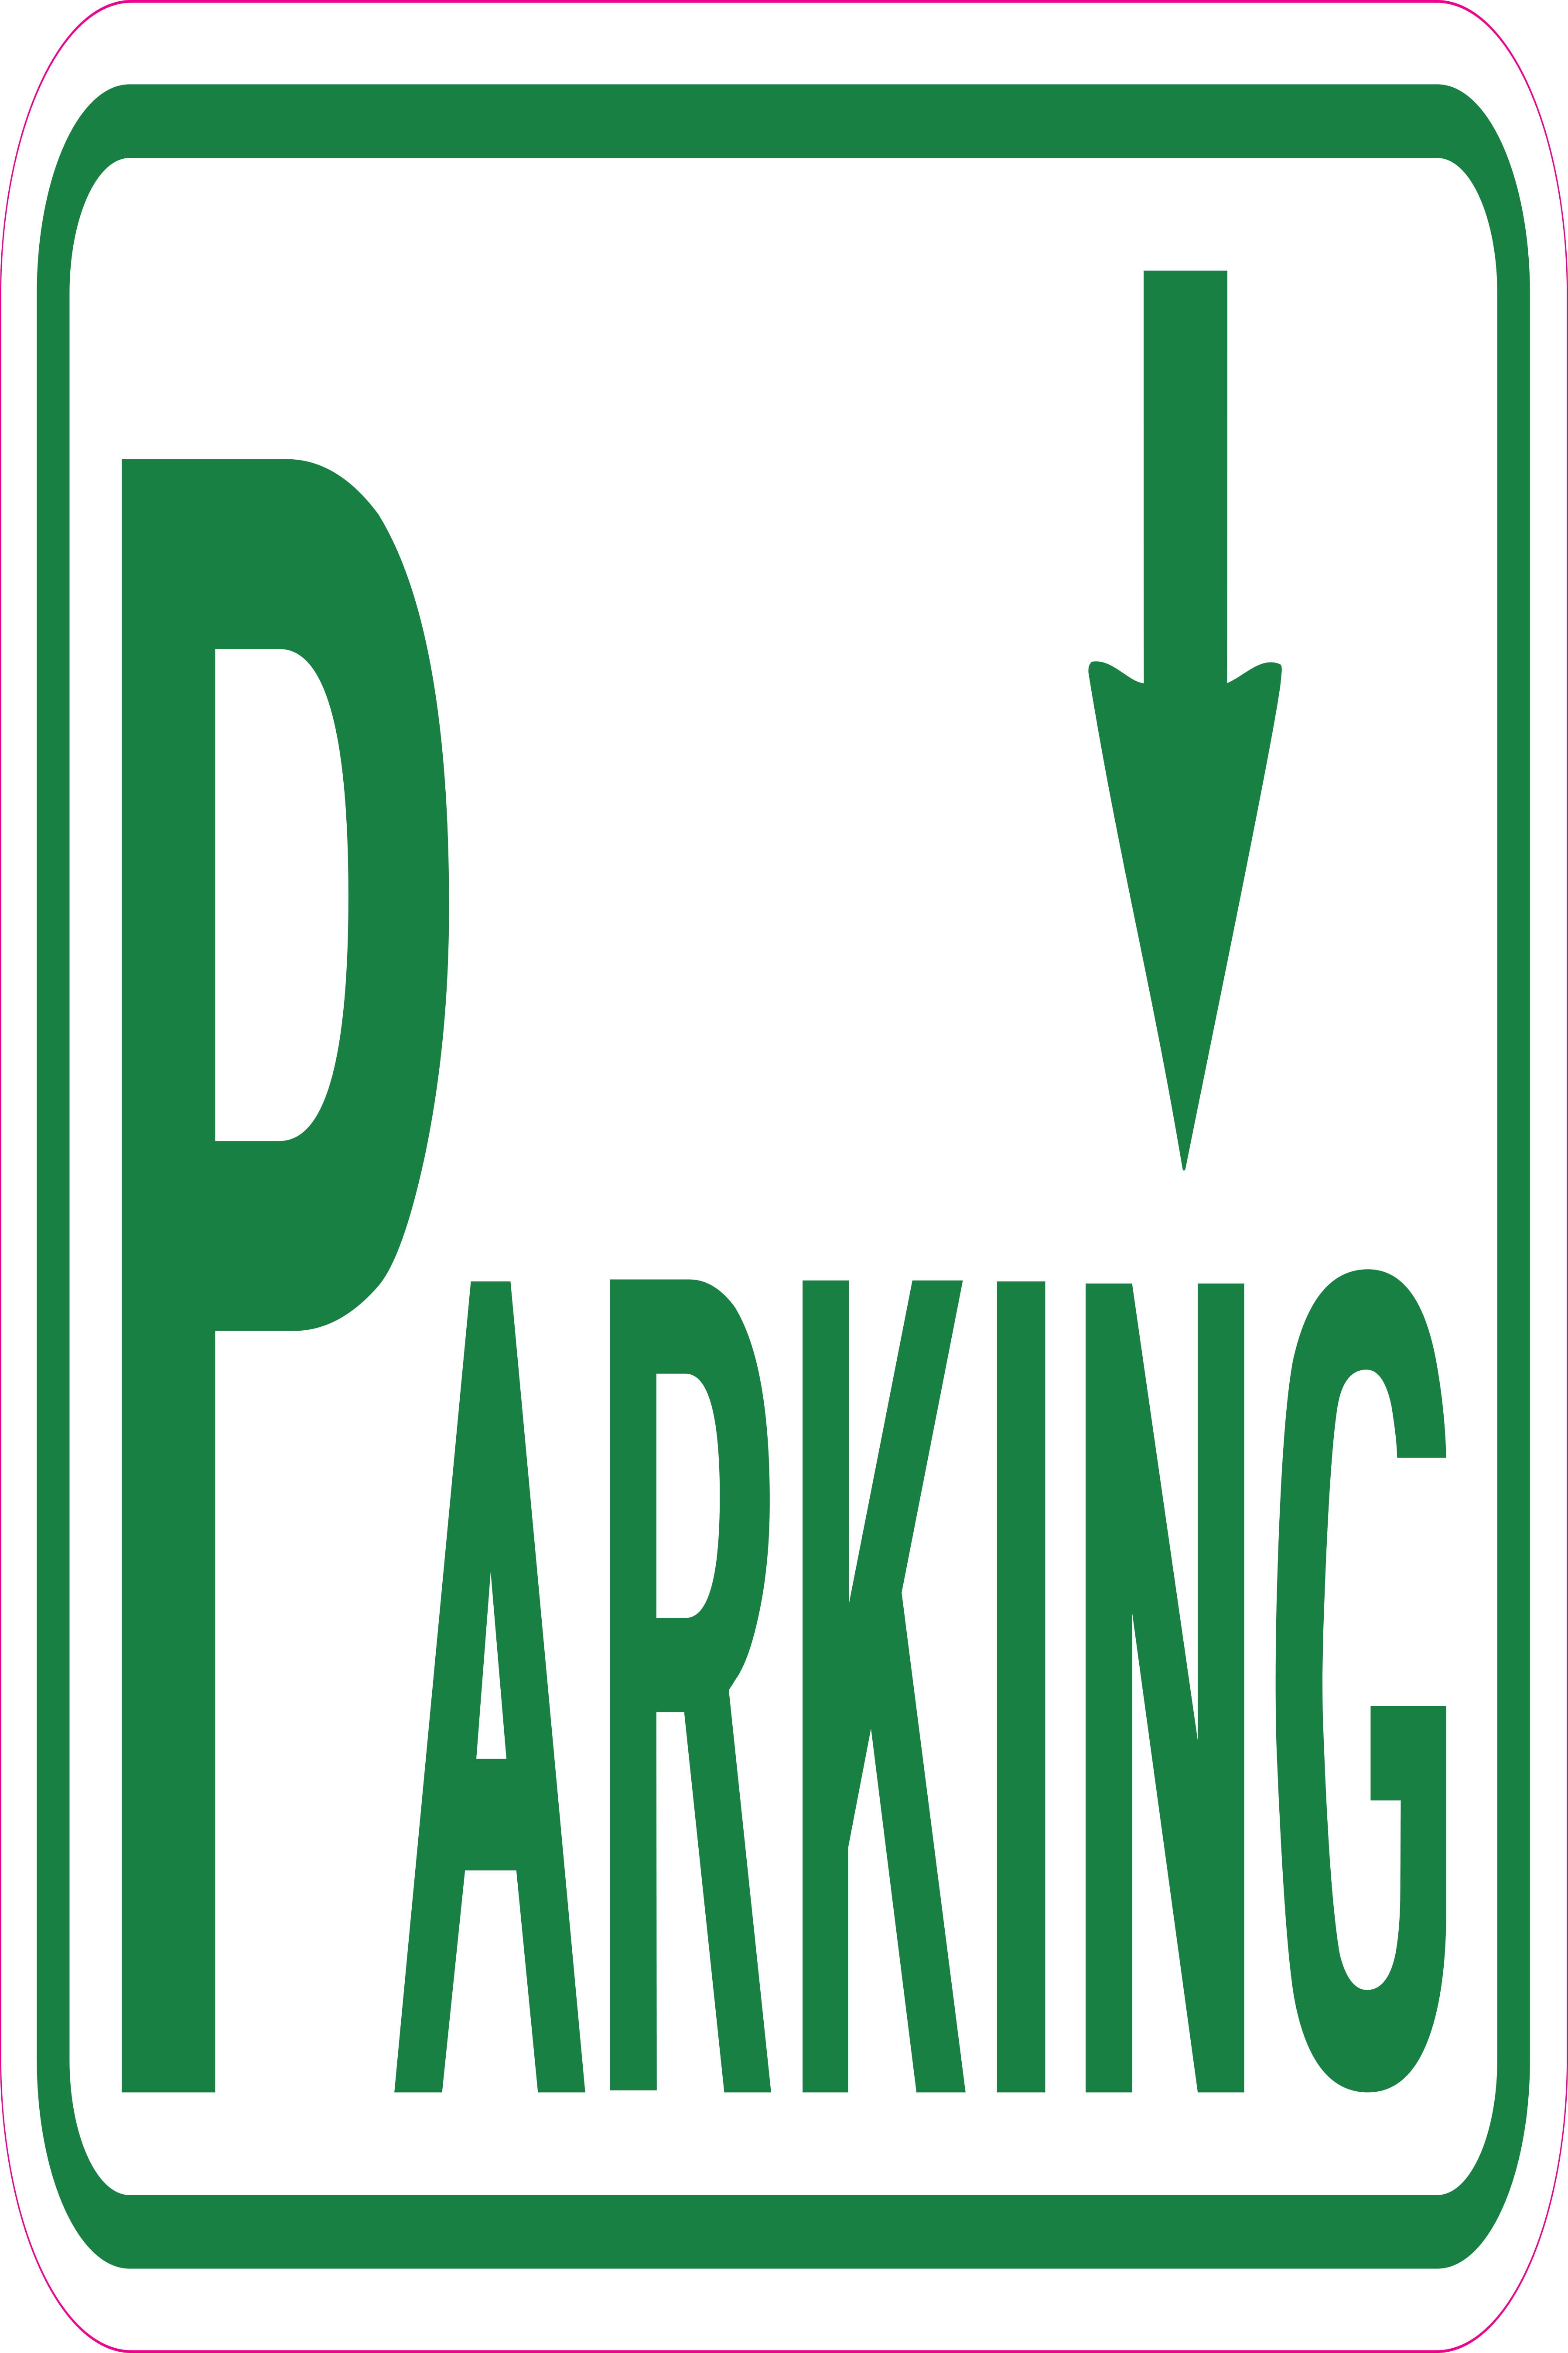 Made in The USA Parking with Arrow Pointing Left Protect Your Business & Municipality 12 X 18 Heavy-Gauge Aluminum Rust Proof Parking Sign 